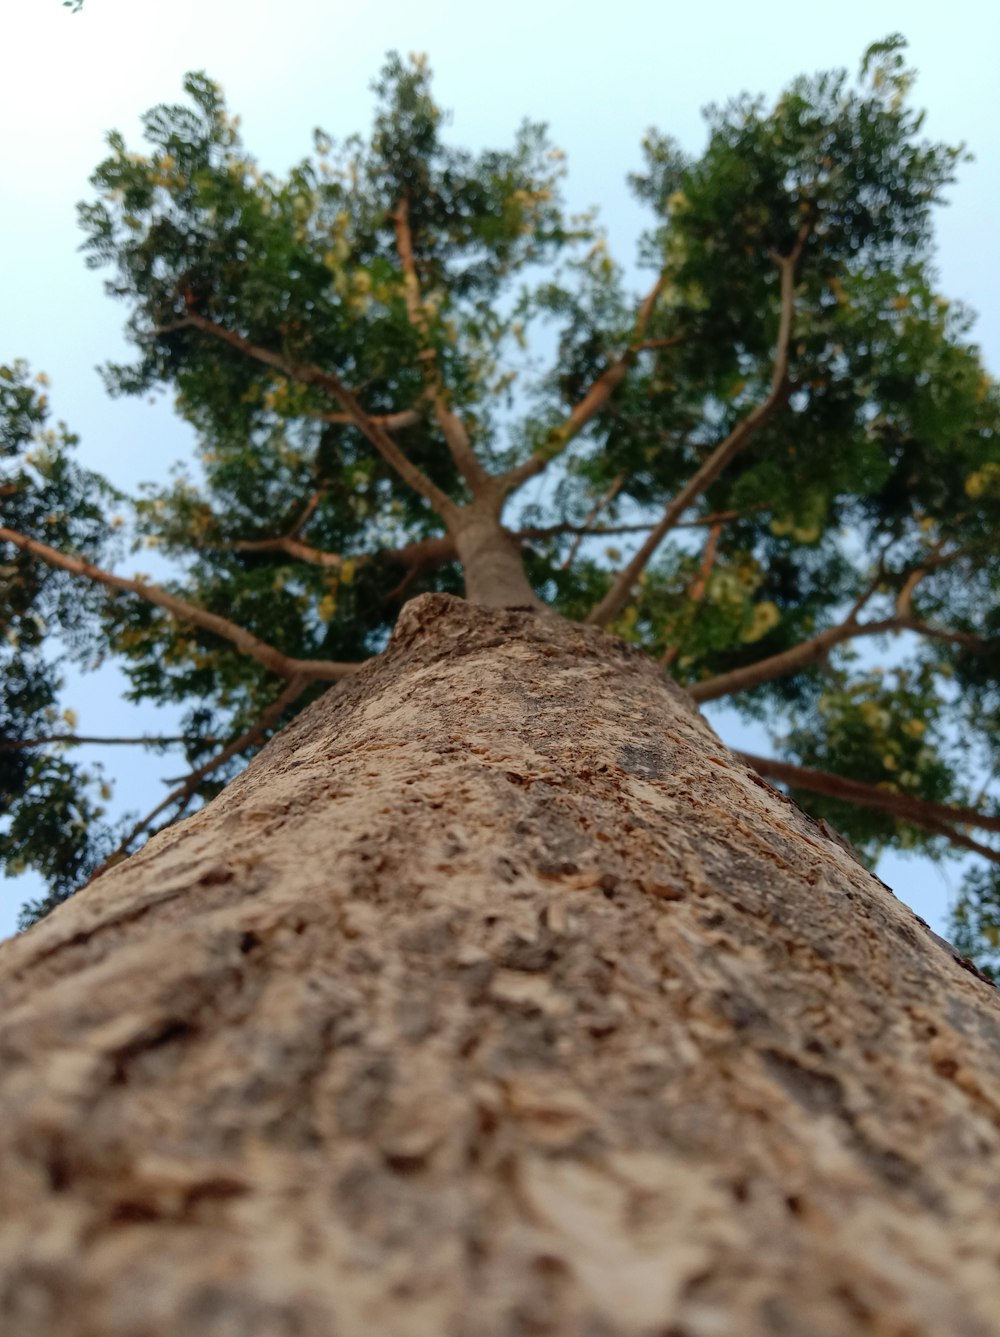 a view looking up at the top of a tall tree